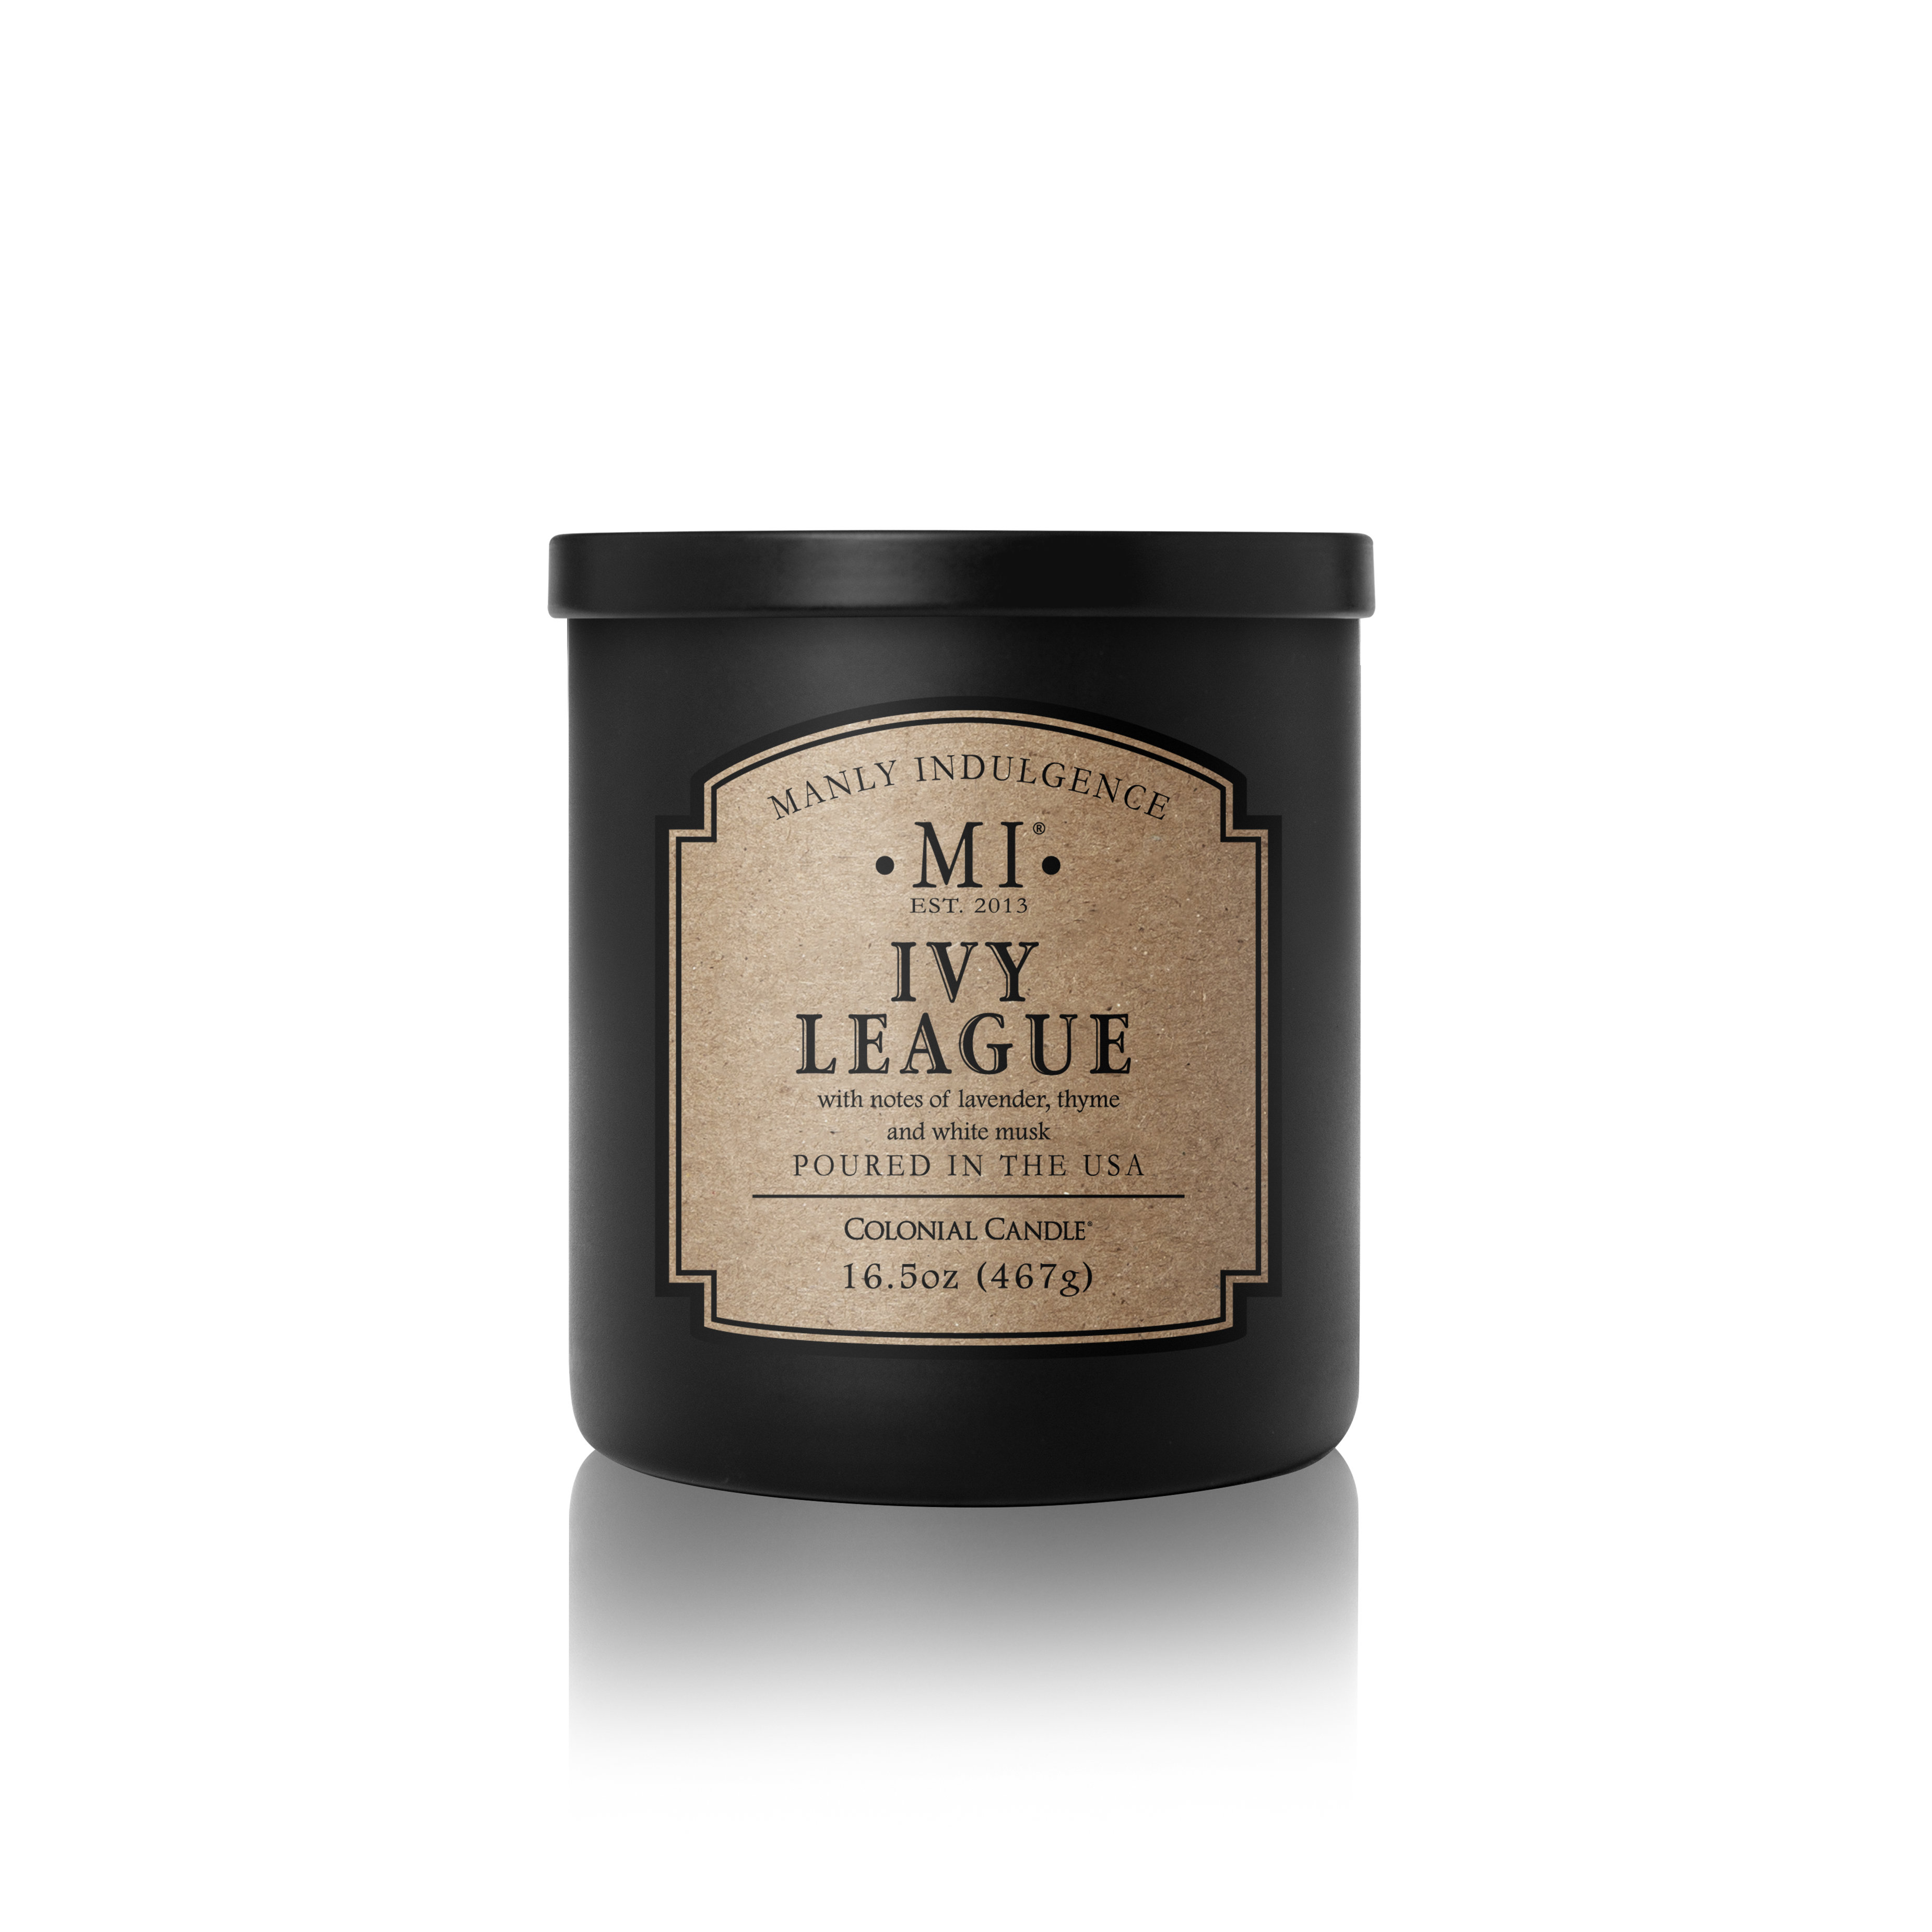 Palo Santo 15oz Manly Indulgence Scented Jar Candle Signature Collection 